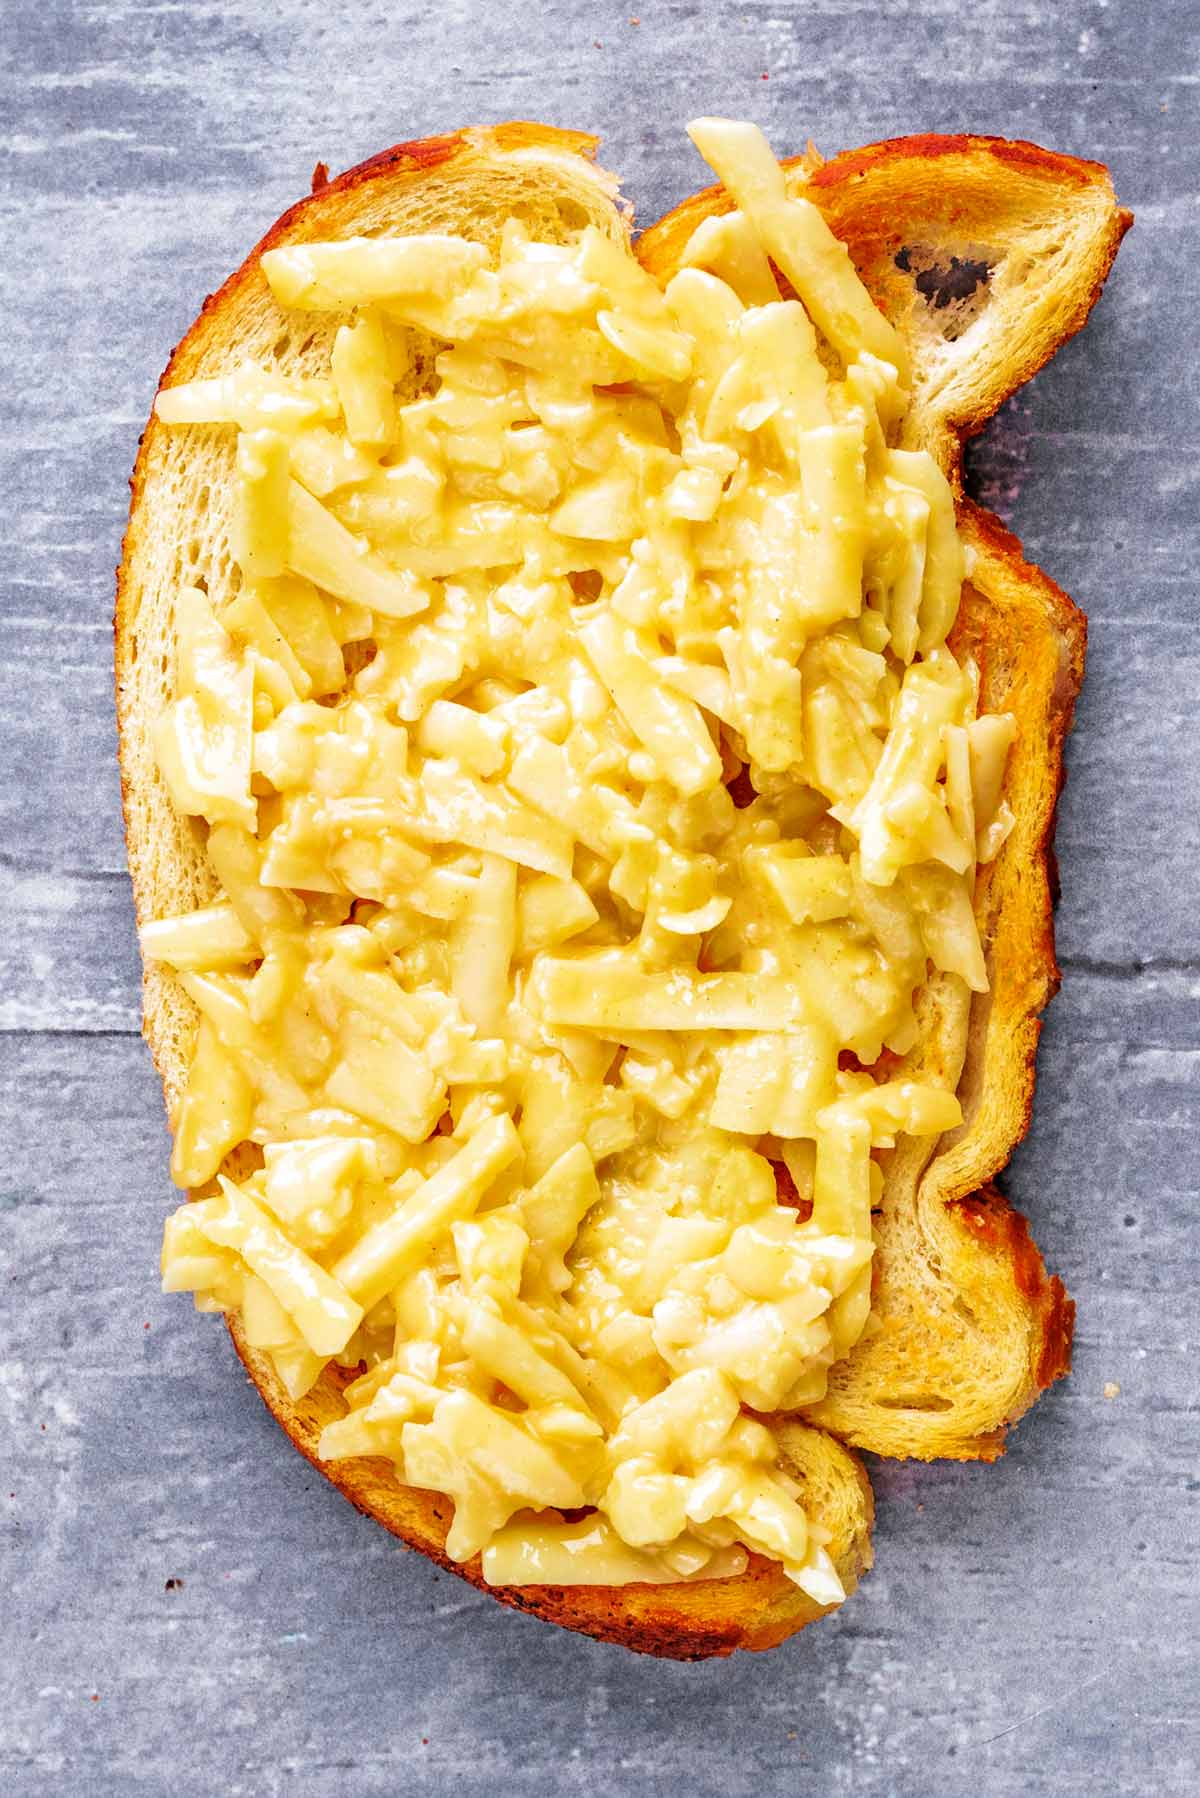 The cheese mixture spread over a slice of toasted bread.